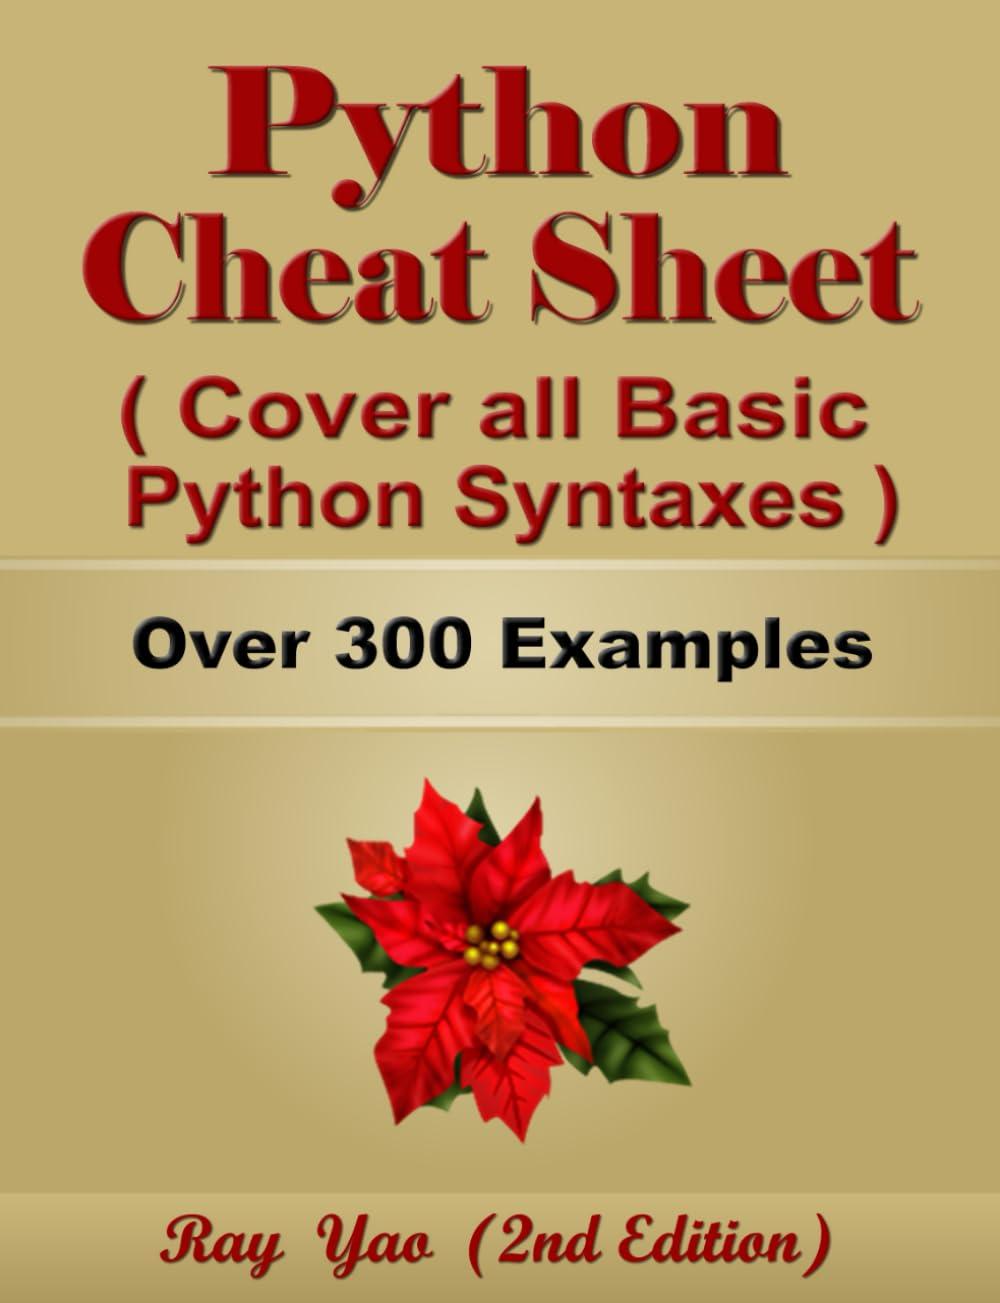 python cheat sheet cover all basic python syntaxes 2nd edition rose king, ray yao b0ckrqk4t8, 979-8863860169